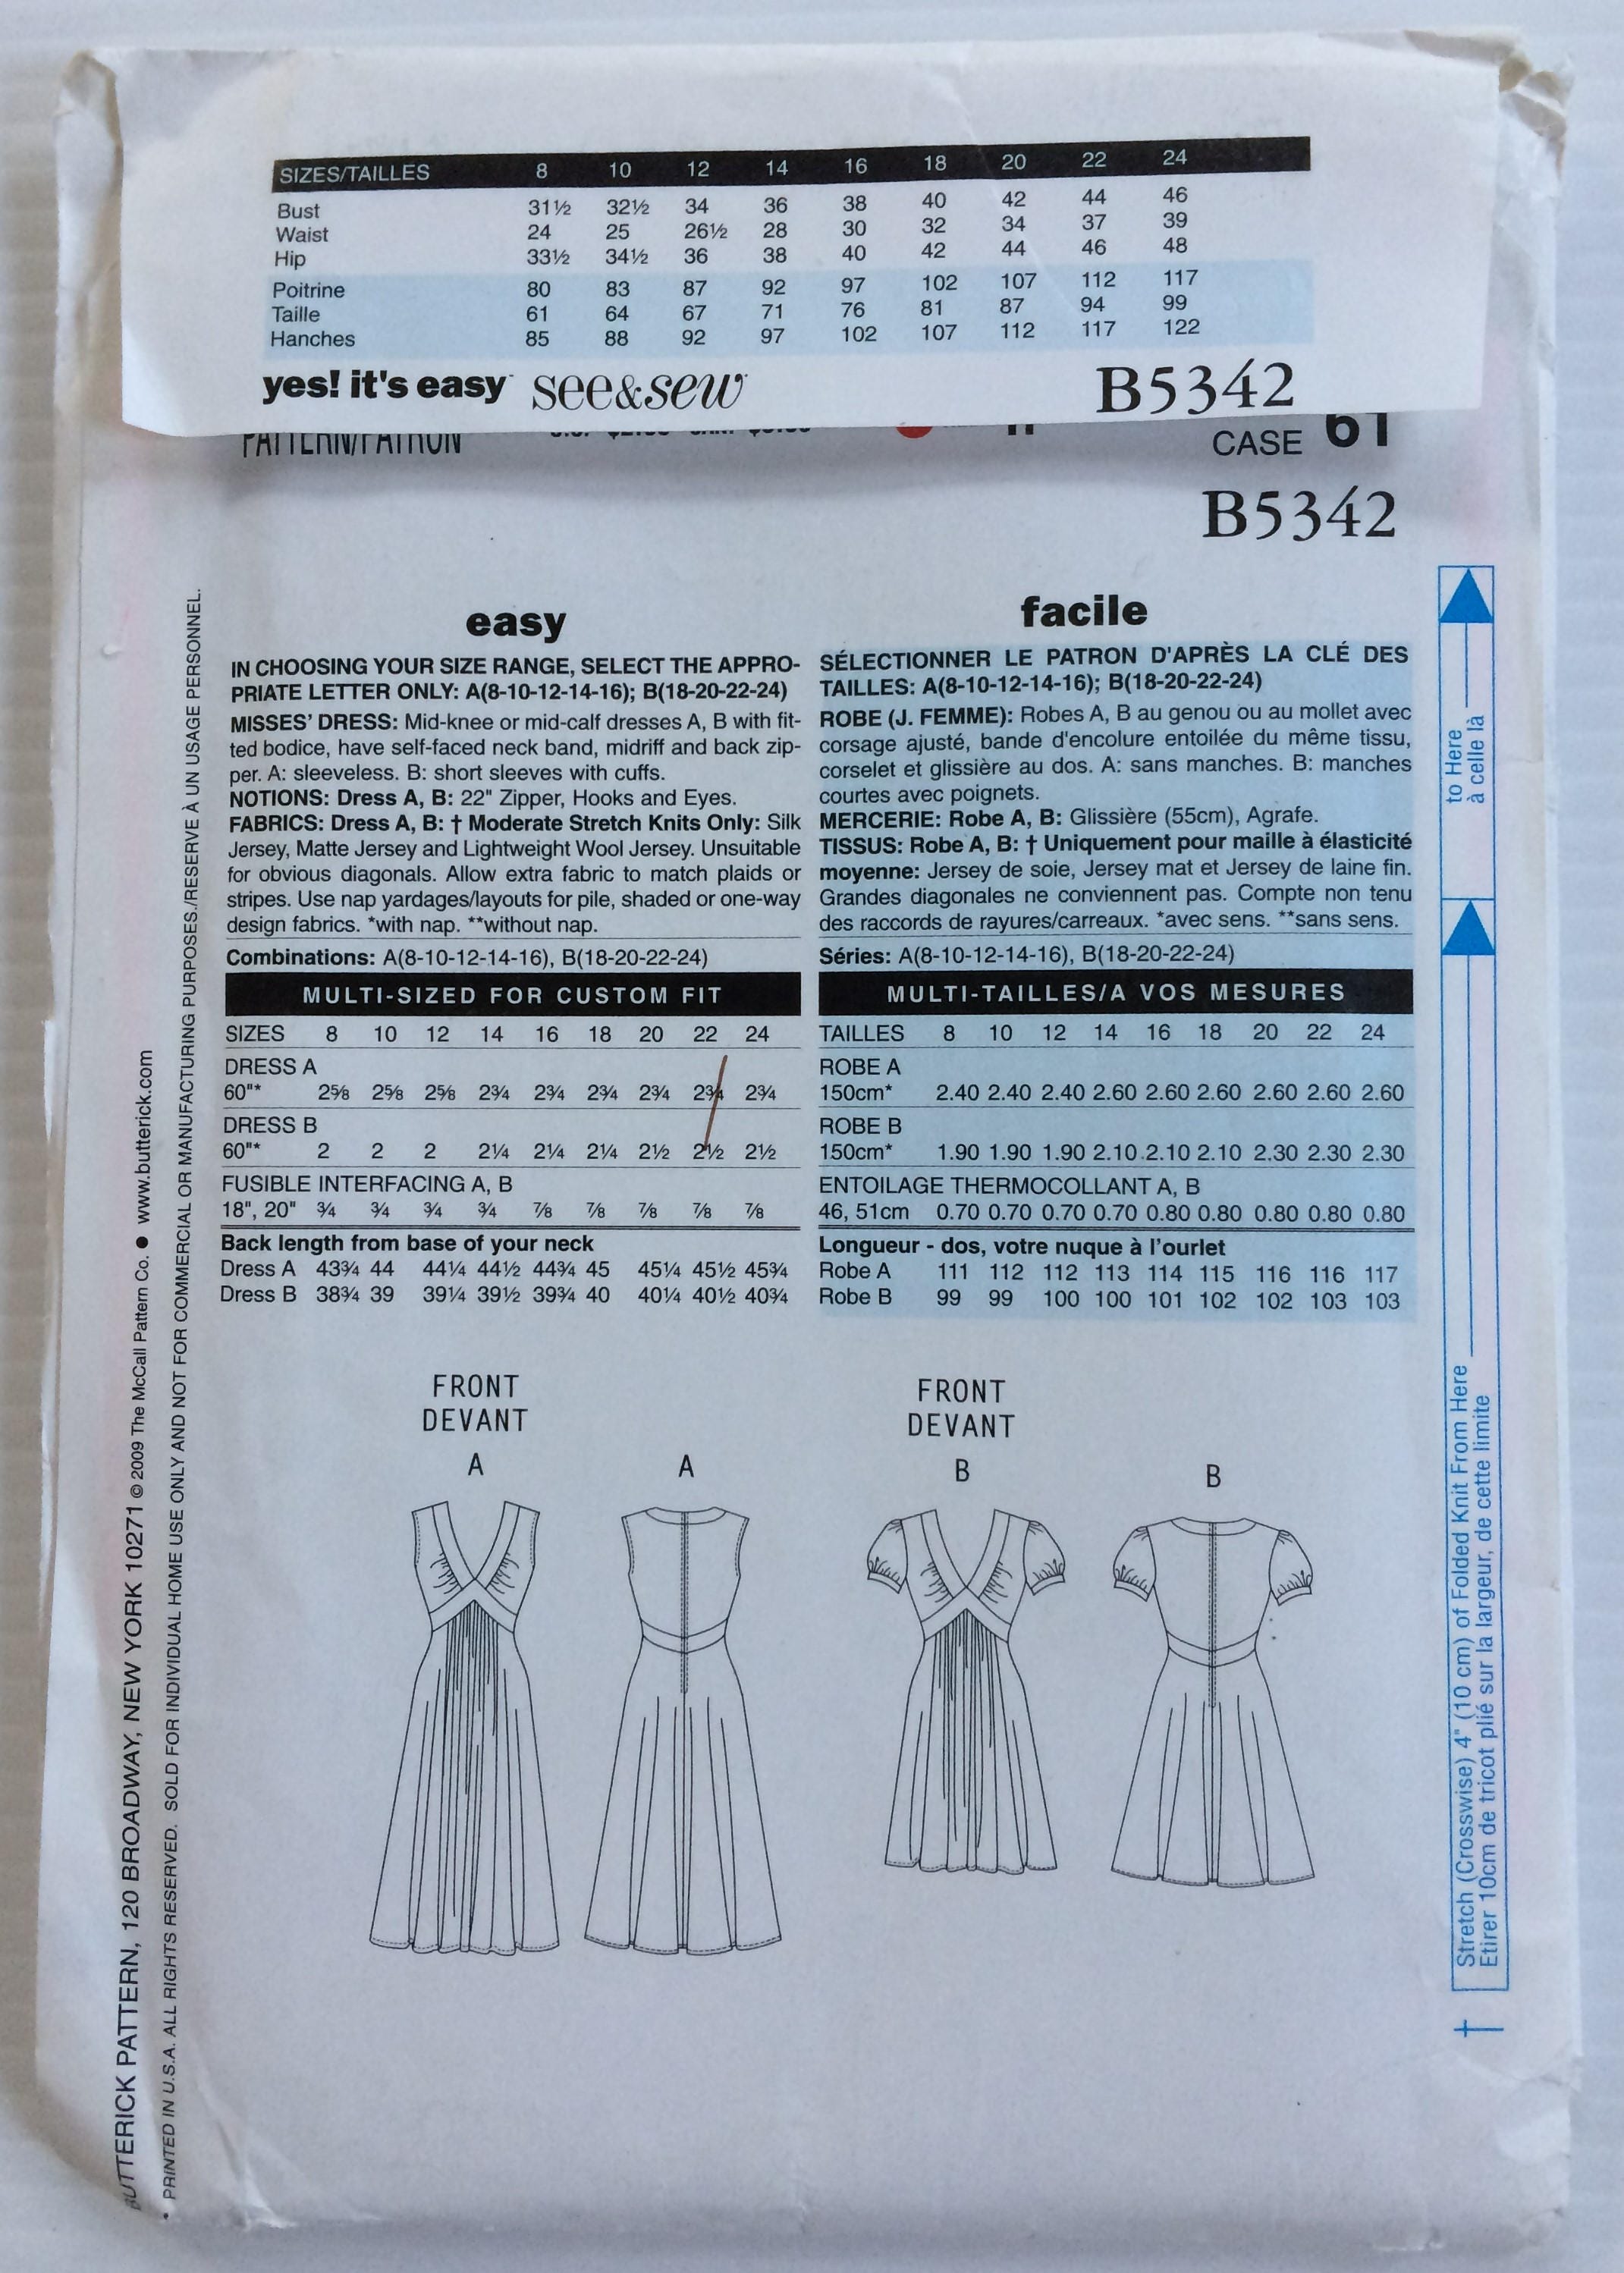 See & Sew sewing pattern B5342 Misses' dress size | Etsy